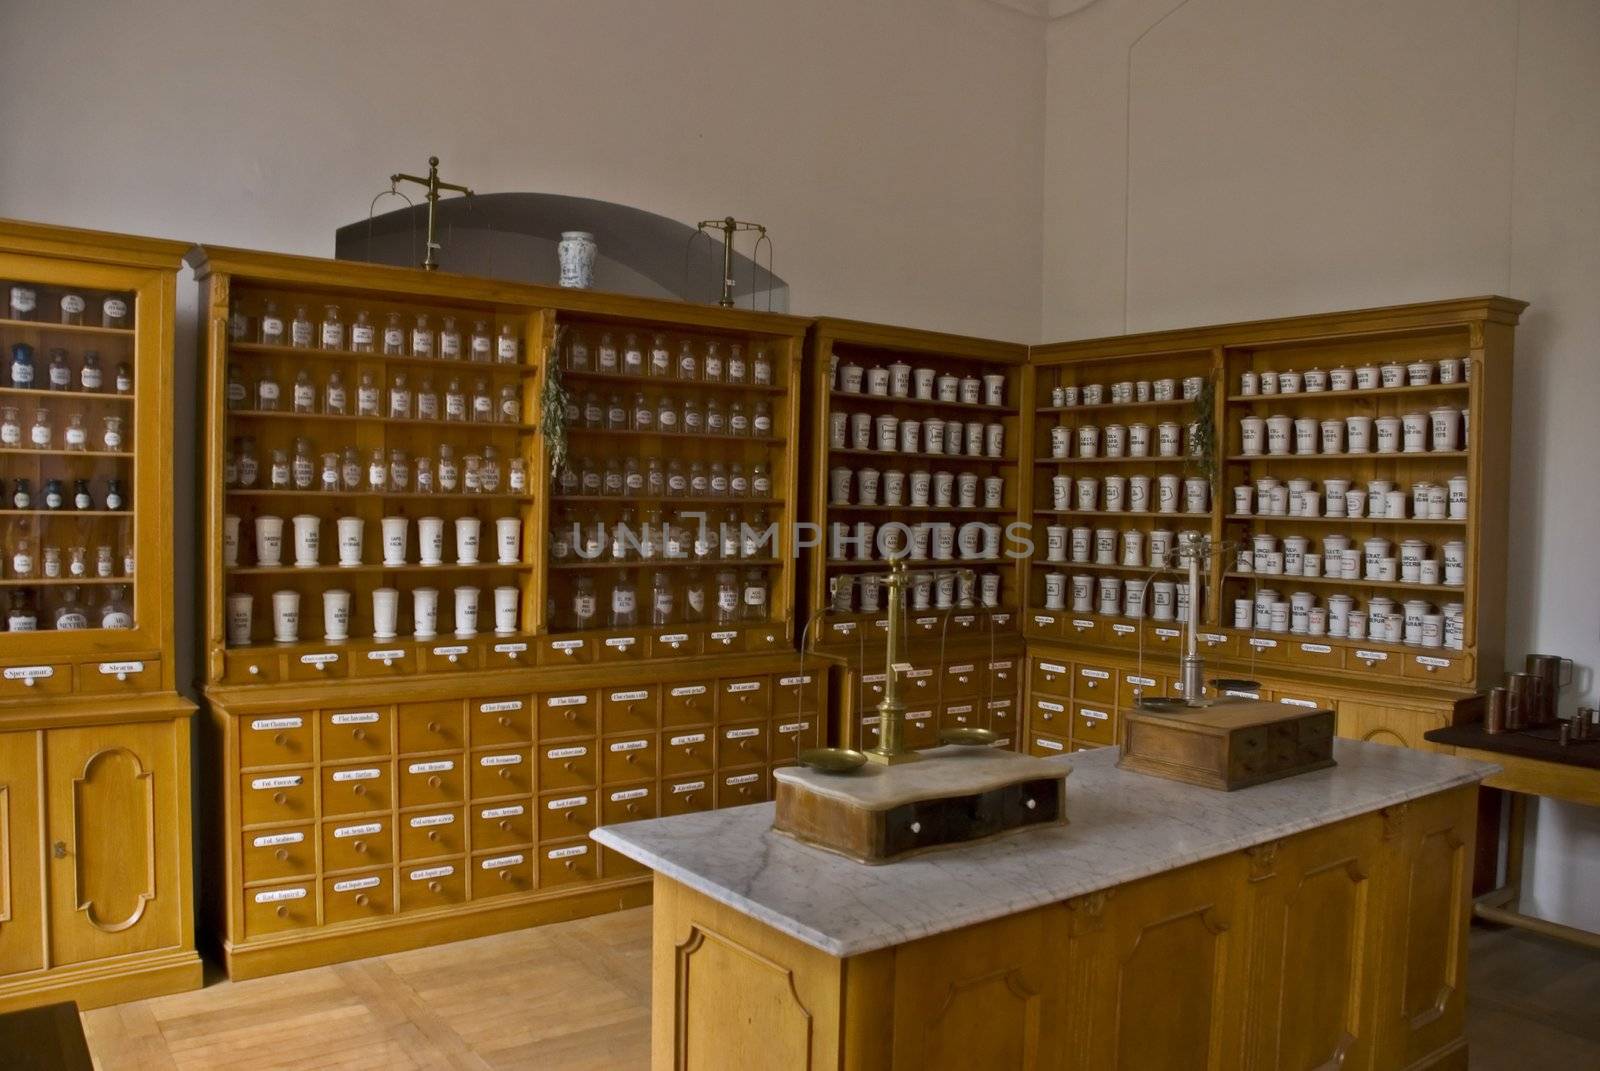 Medieval pharmacy with various pots, medicaments and scales 